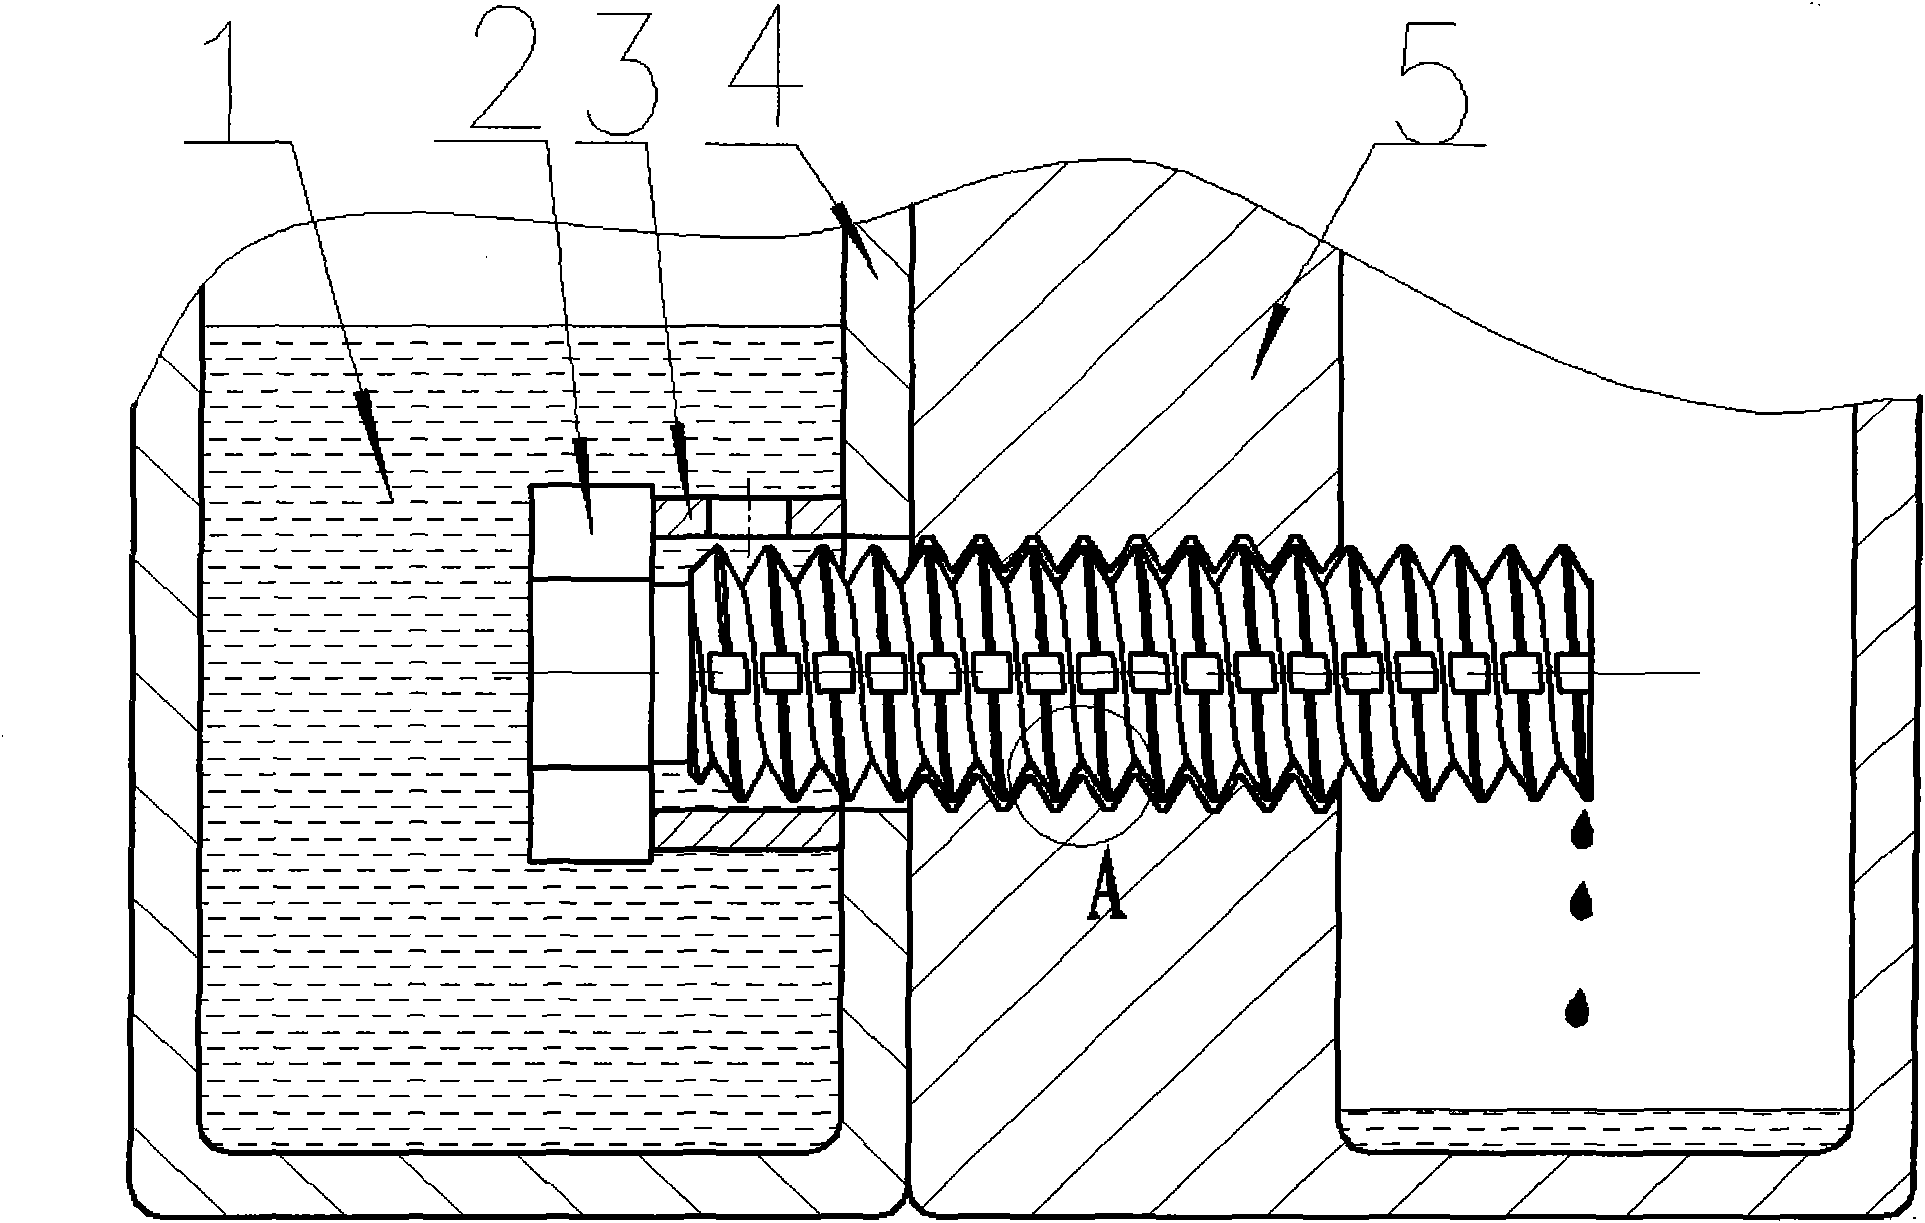 Continuous oil supply device